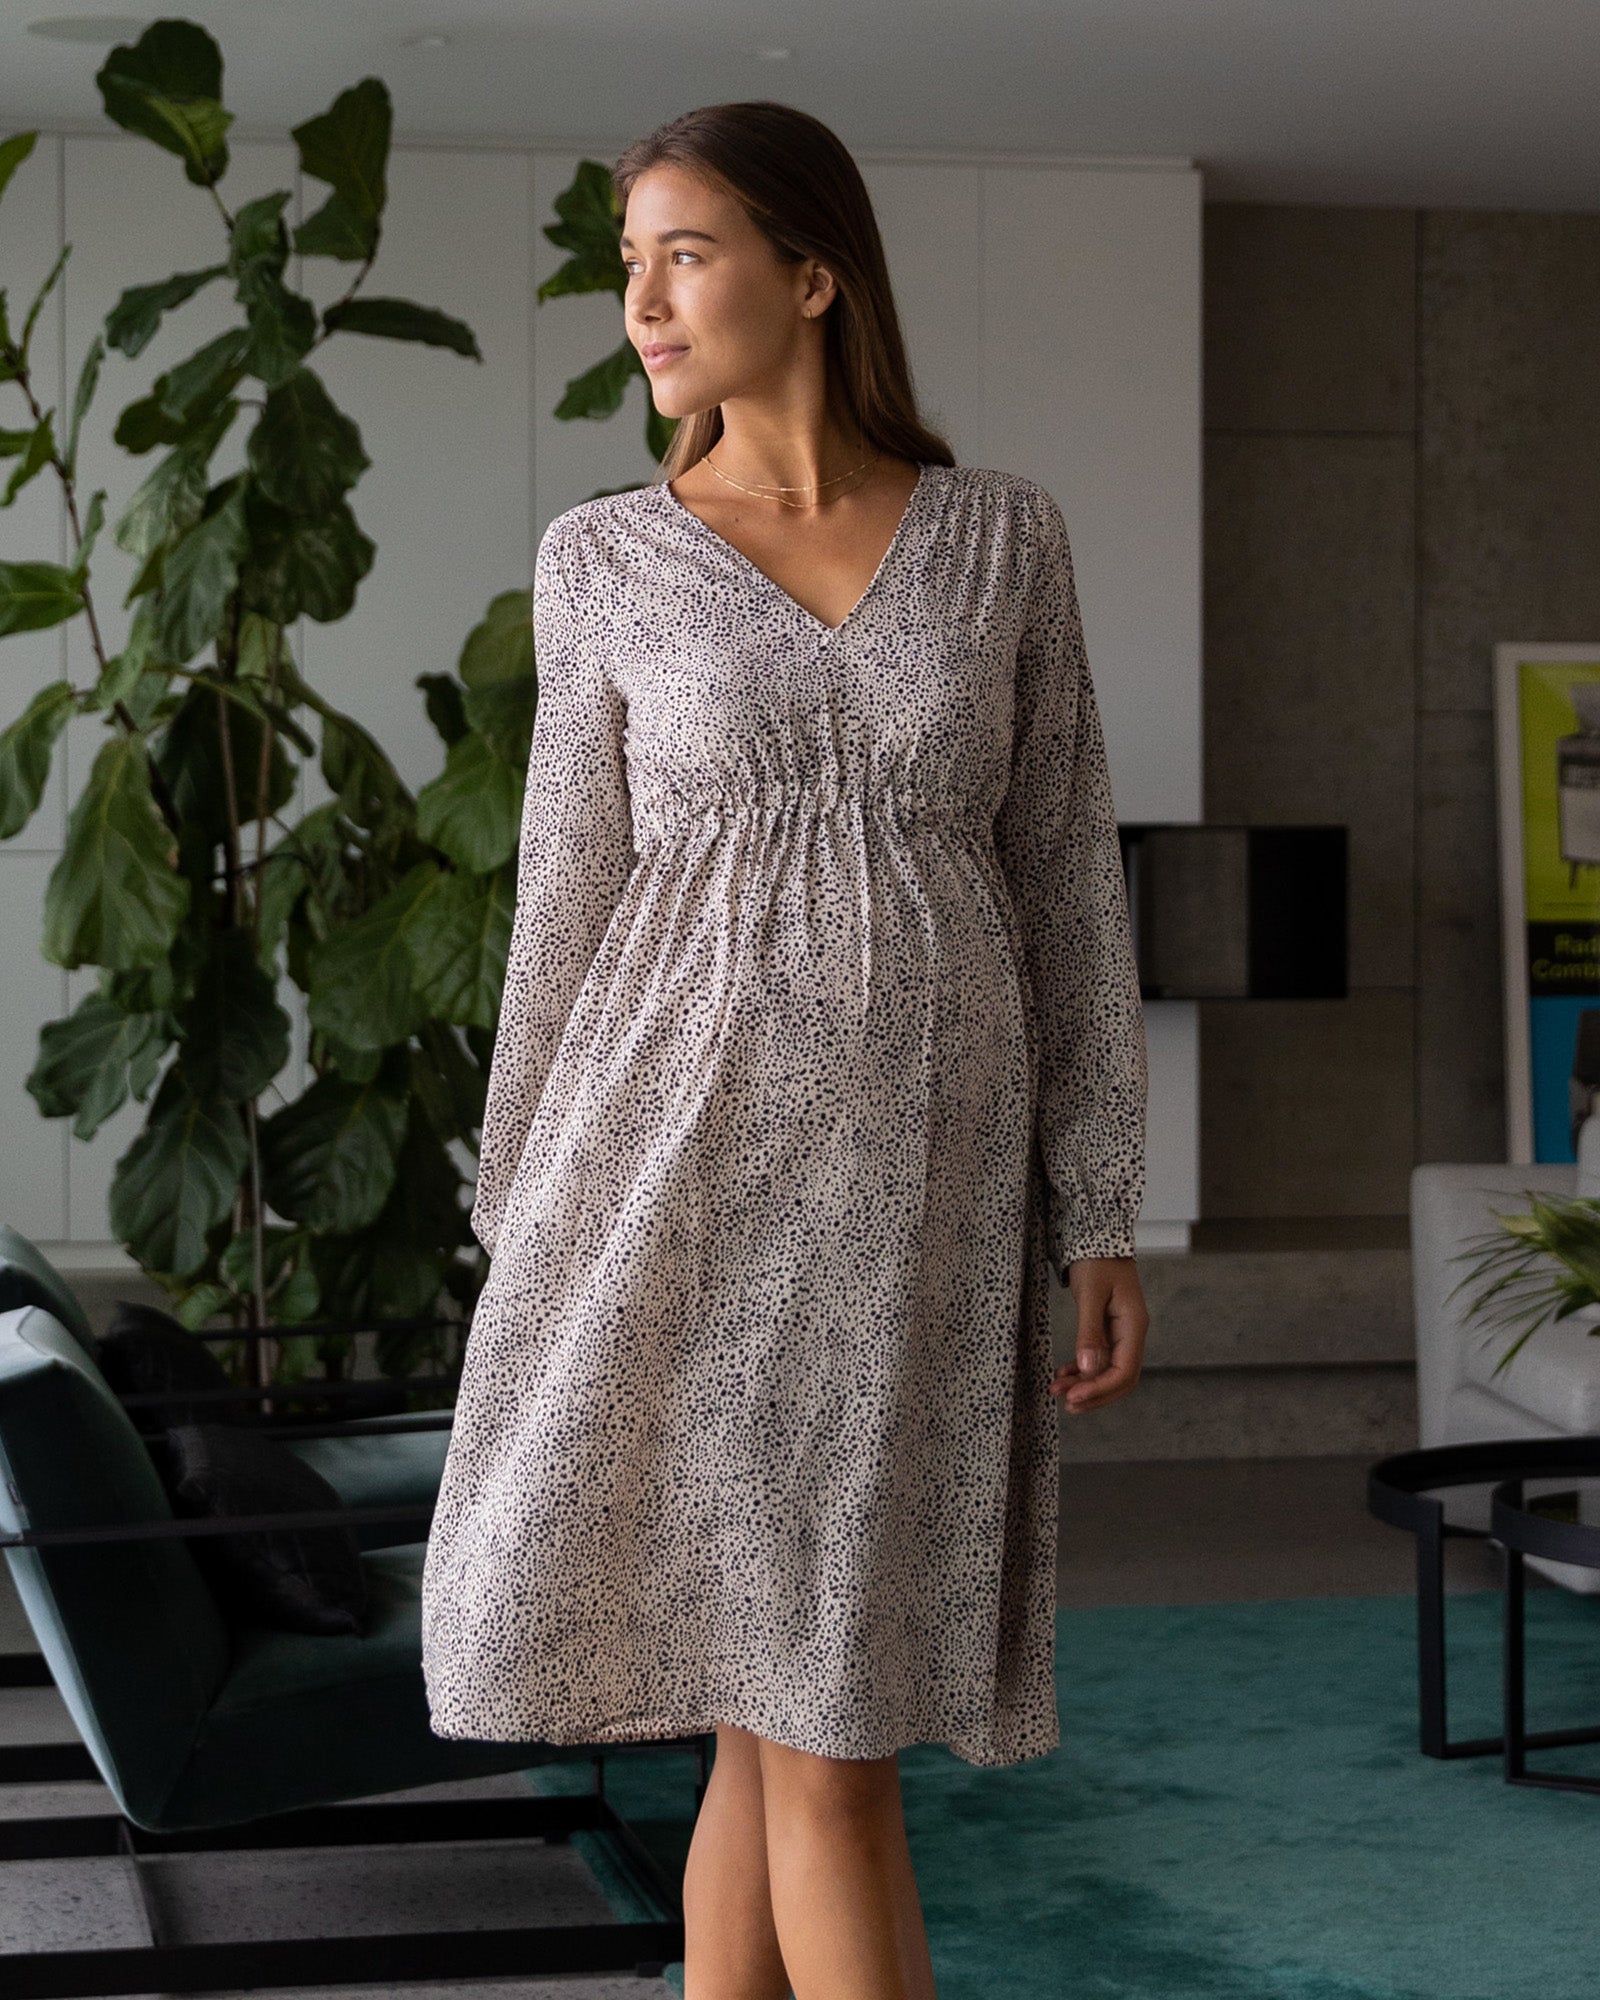 Long Sleeve Maternity Dress For Photography Props Elegant Pregnancy Clothes  Pregnancy Dress Pregnant Photo Shoot Clothing R230519 From Nickyoung06,  $16.99 | DHgate.Com